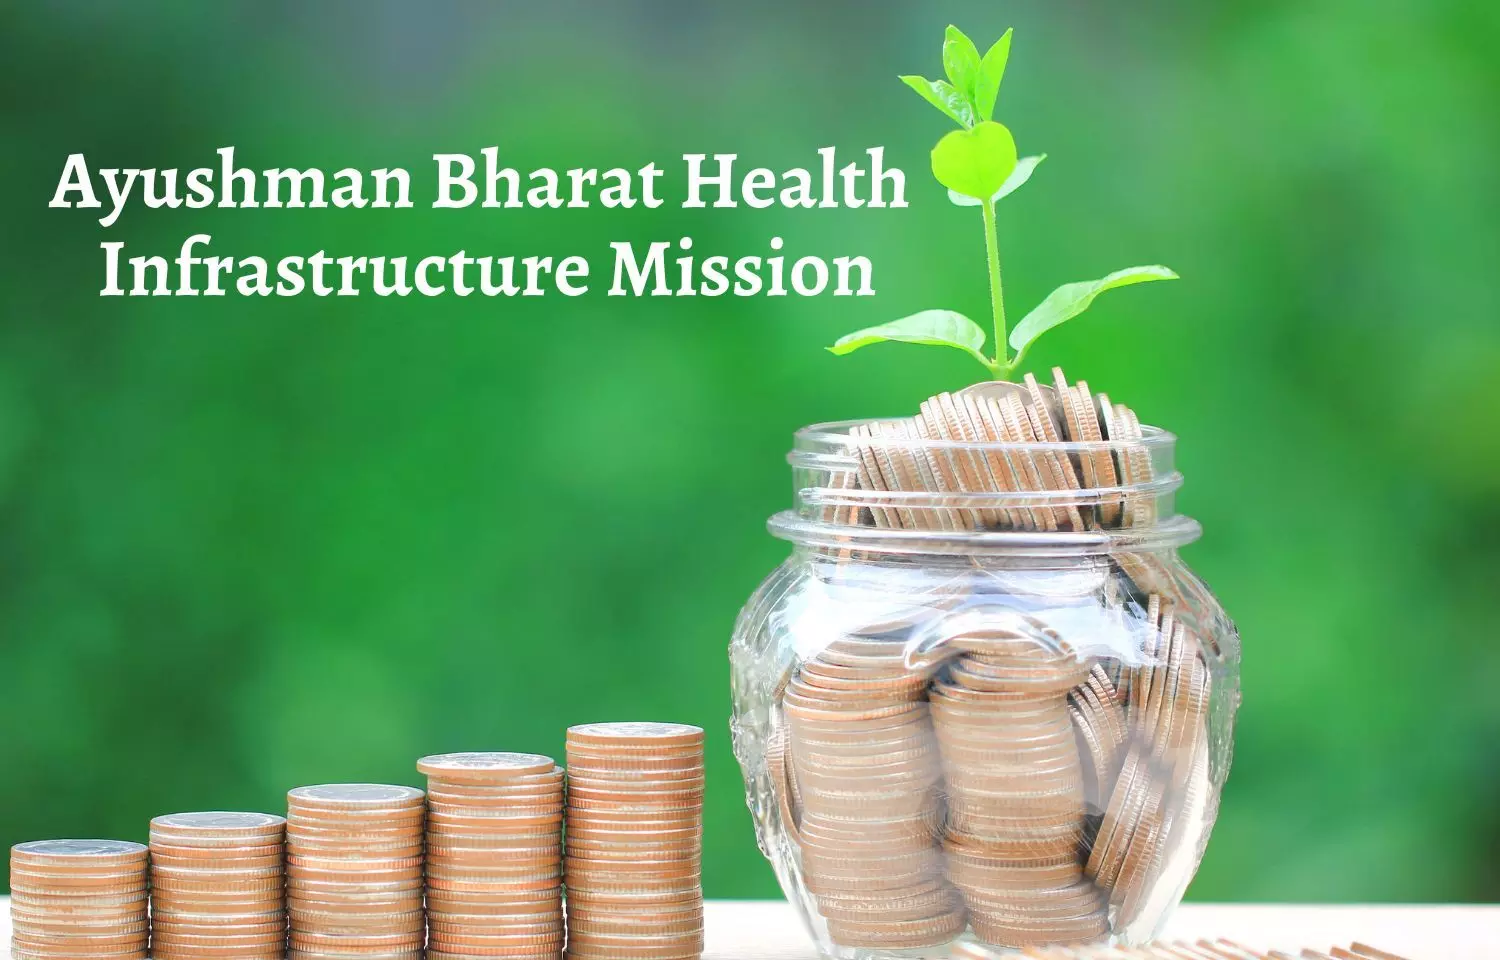 HP: Central Govt to grant Rs 400 crore under Ayushman Bharat Health Infrastructure Mission